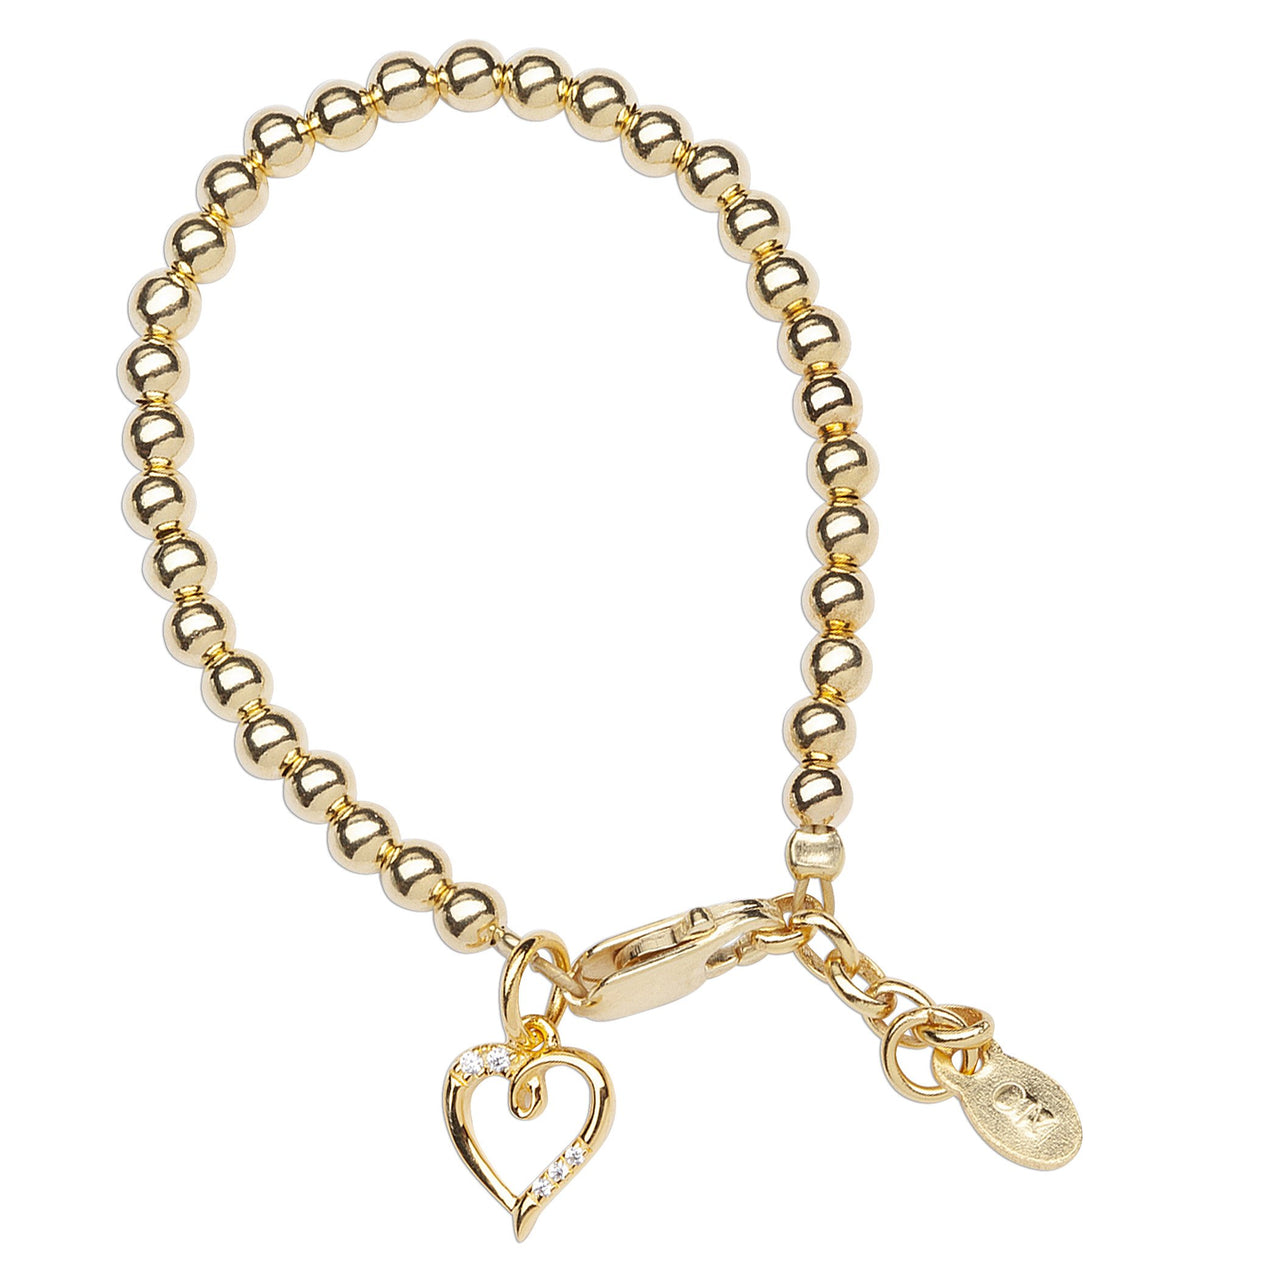 Cherished Moments Aria 14K Gold Plated Bracelet with Heart Charm